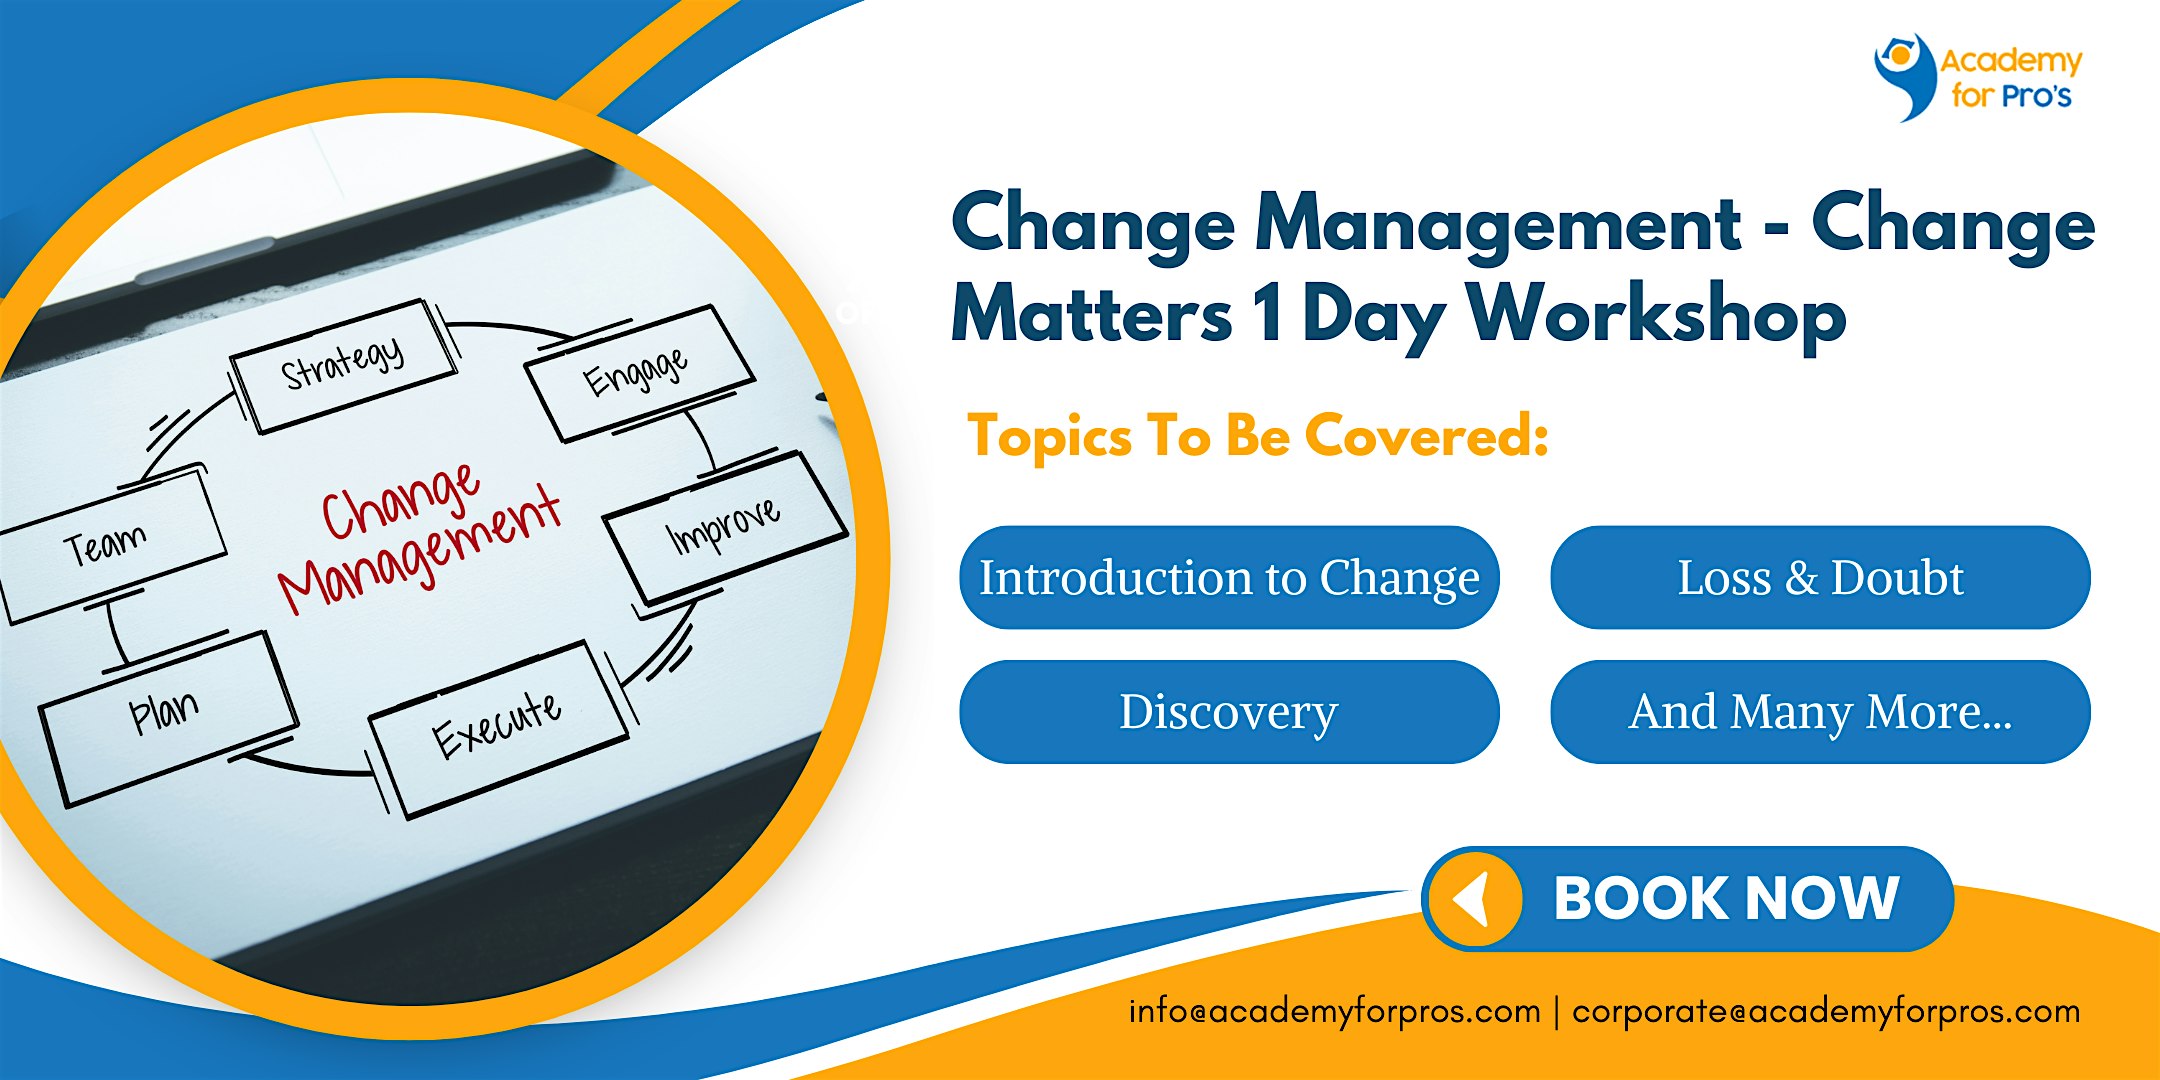 Change Management - Change Matters 1 Day Workshop in Albany, NY